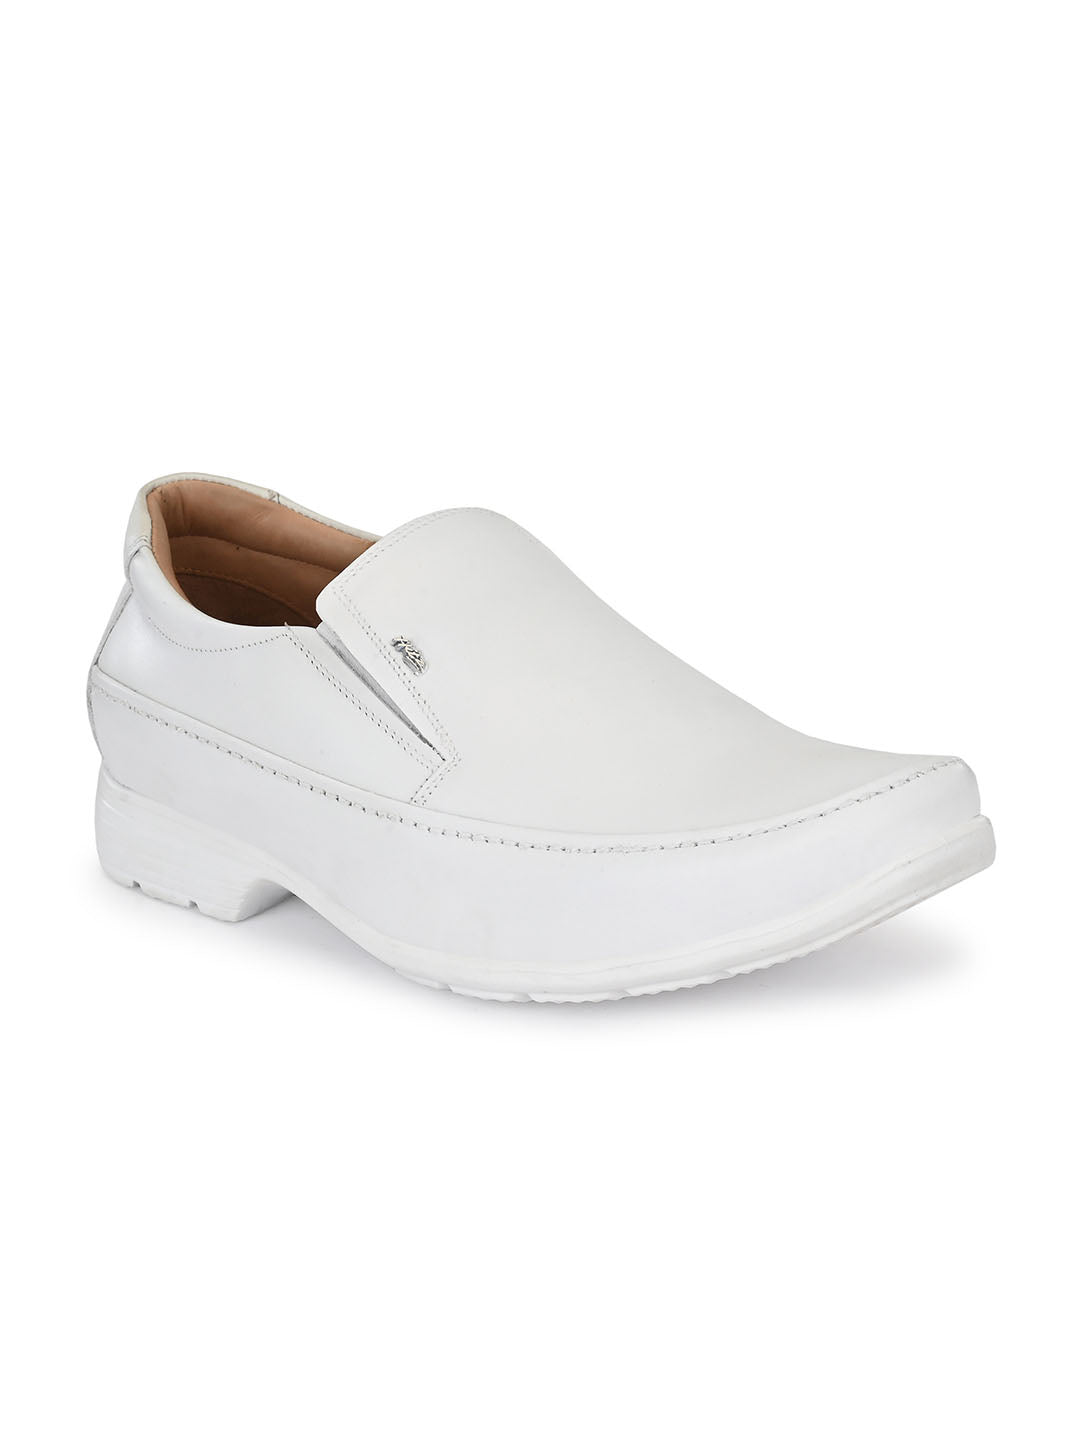 Buy Off White Casual Shoes for Men by CROSS WINGS Online  Ajiocom